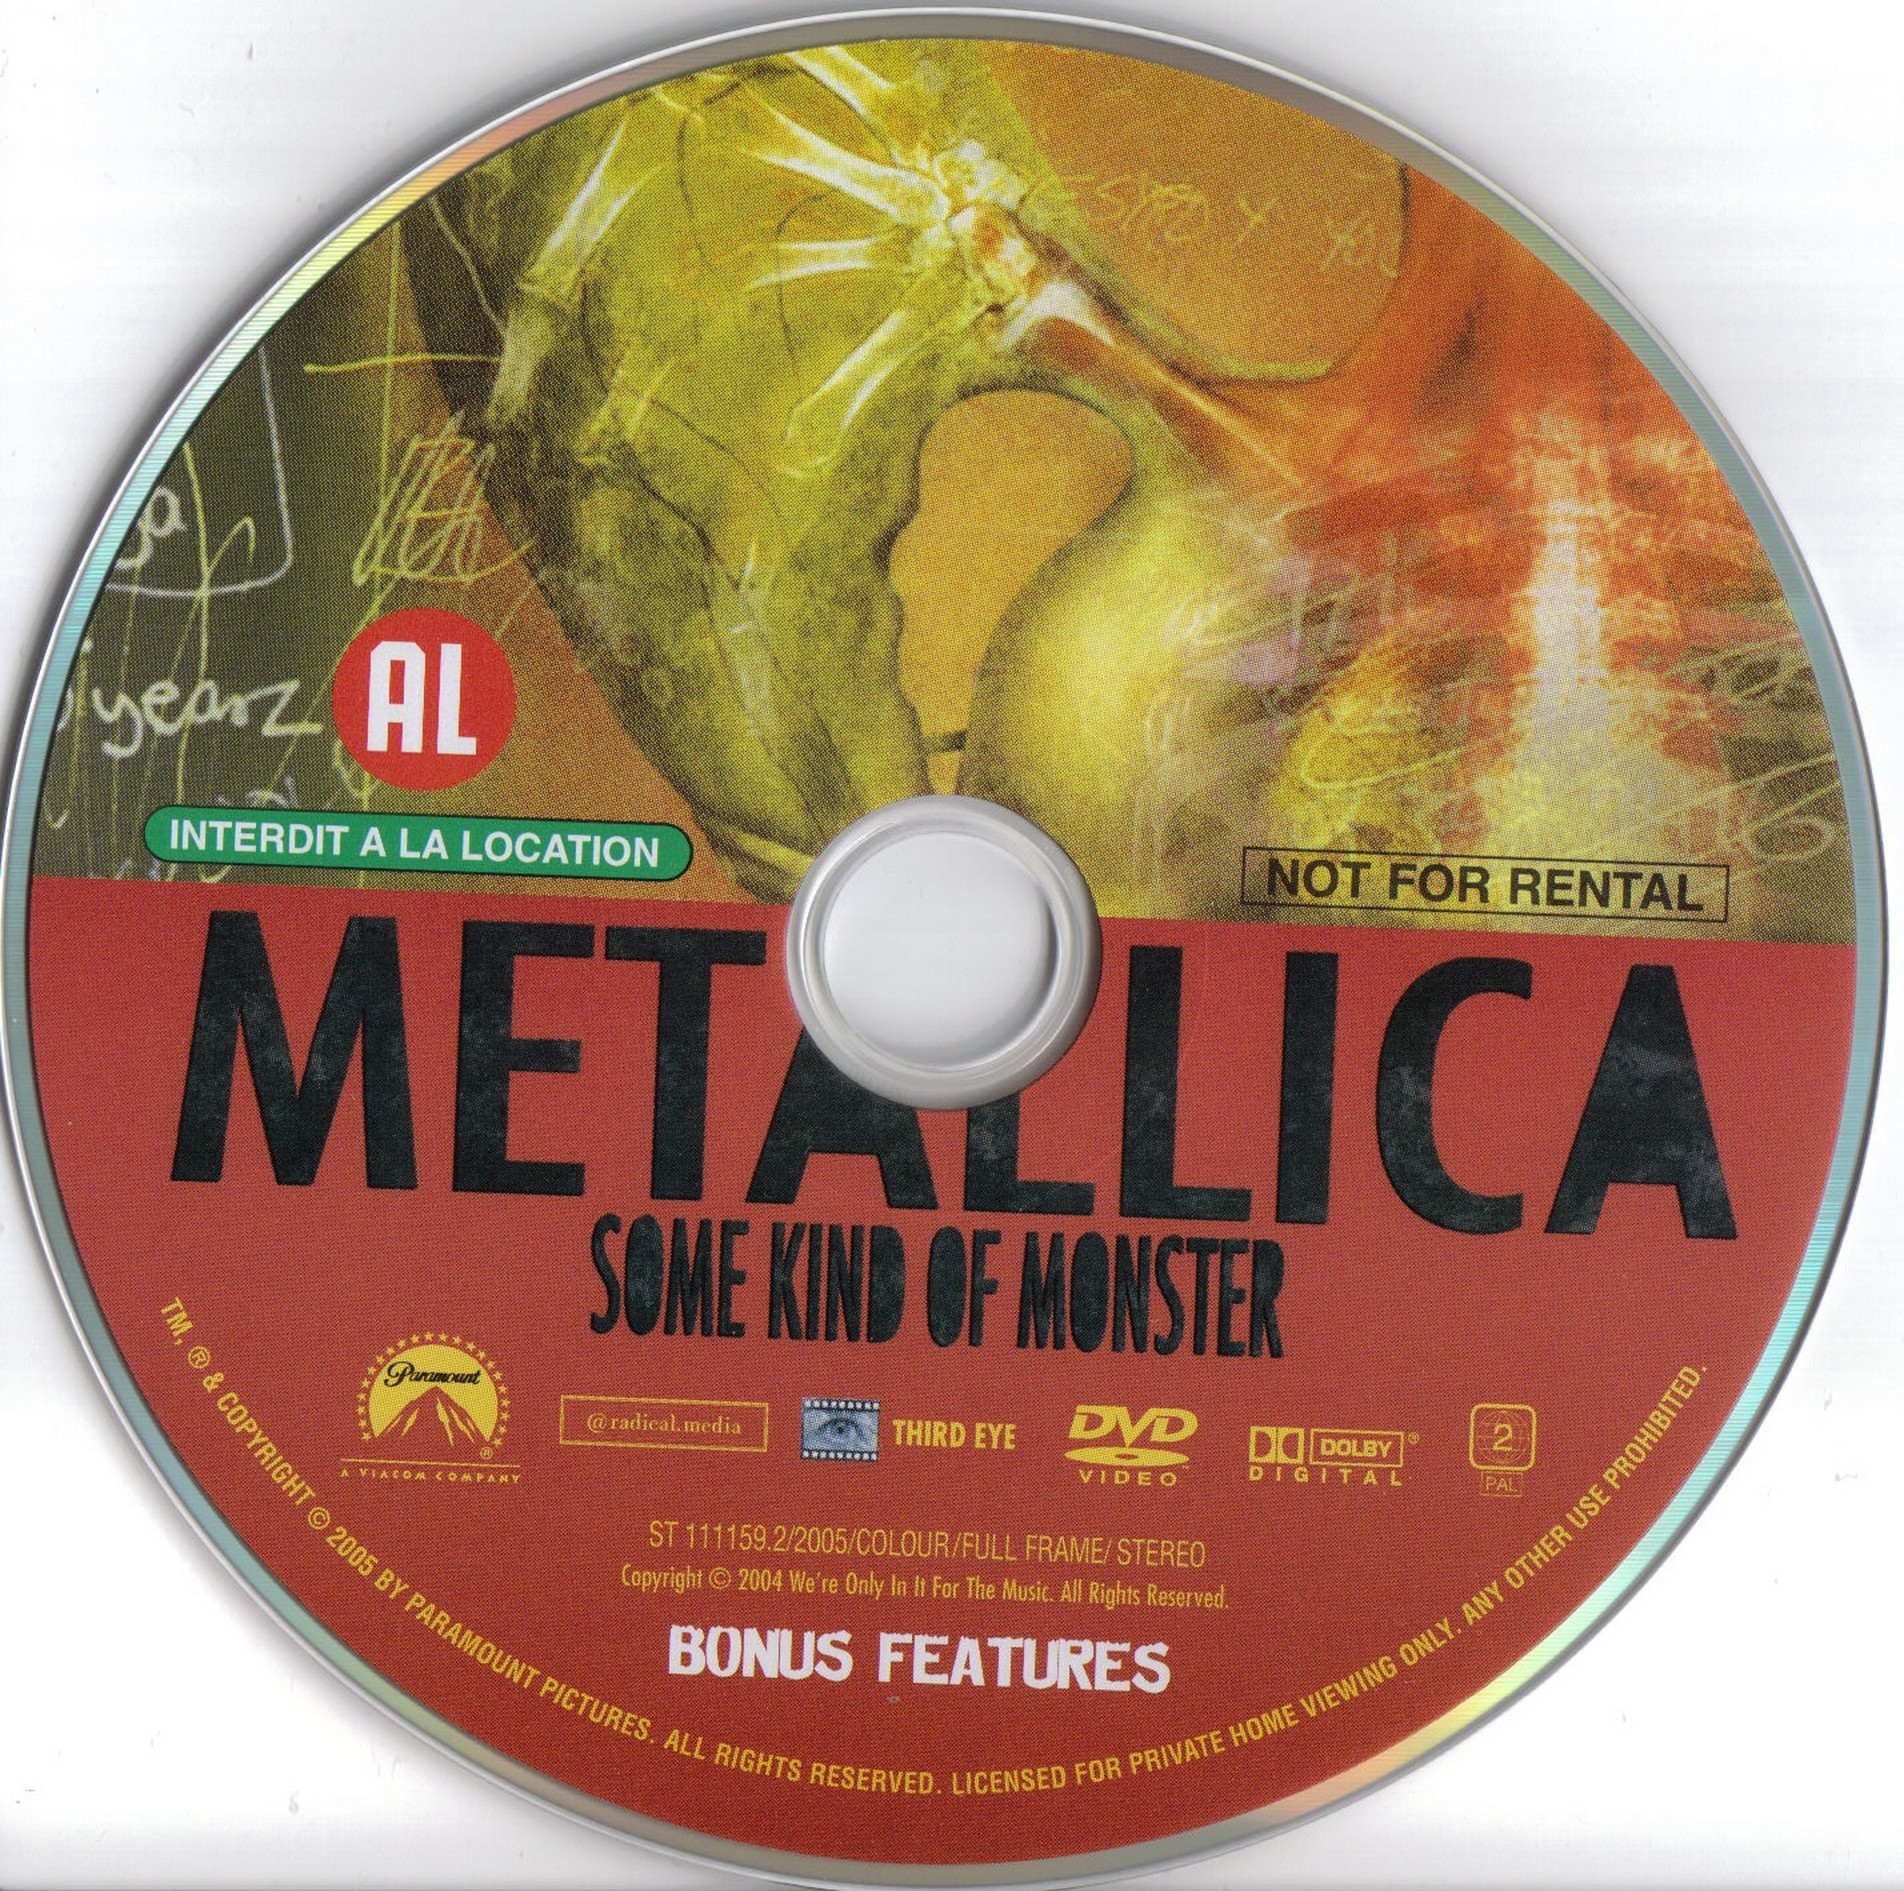 Metallica some kind of monster DISC 2